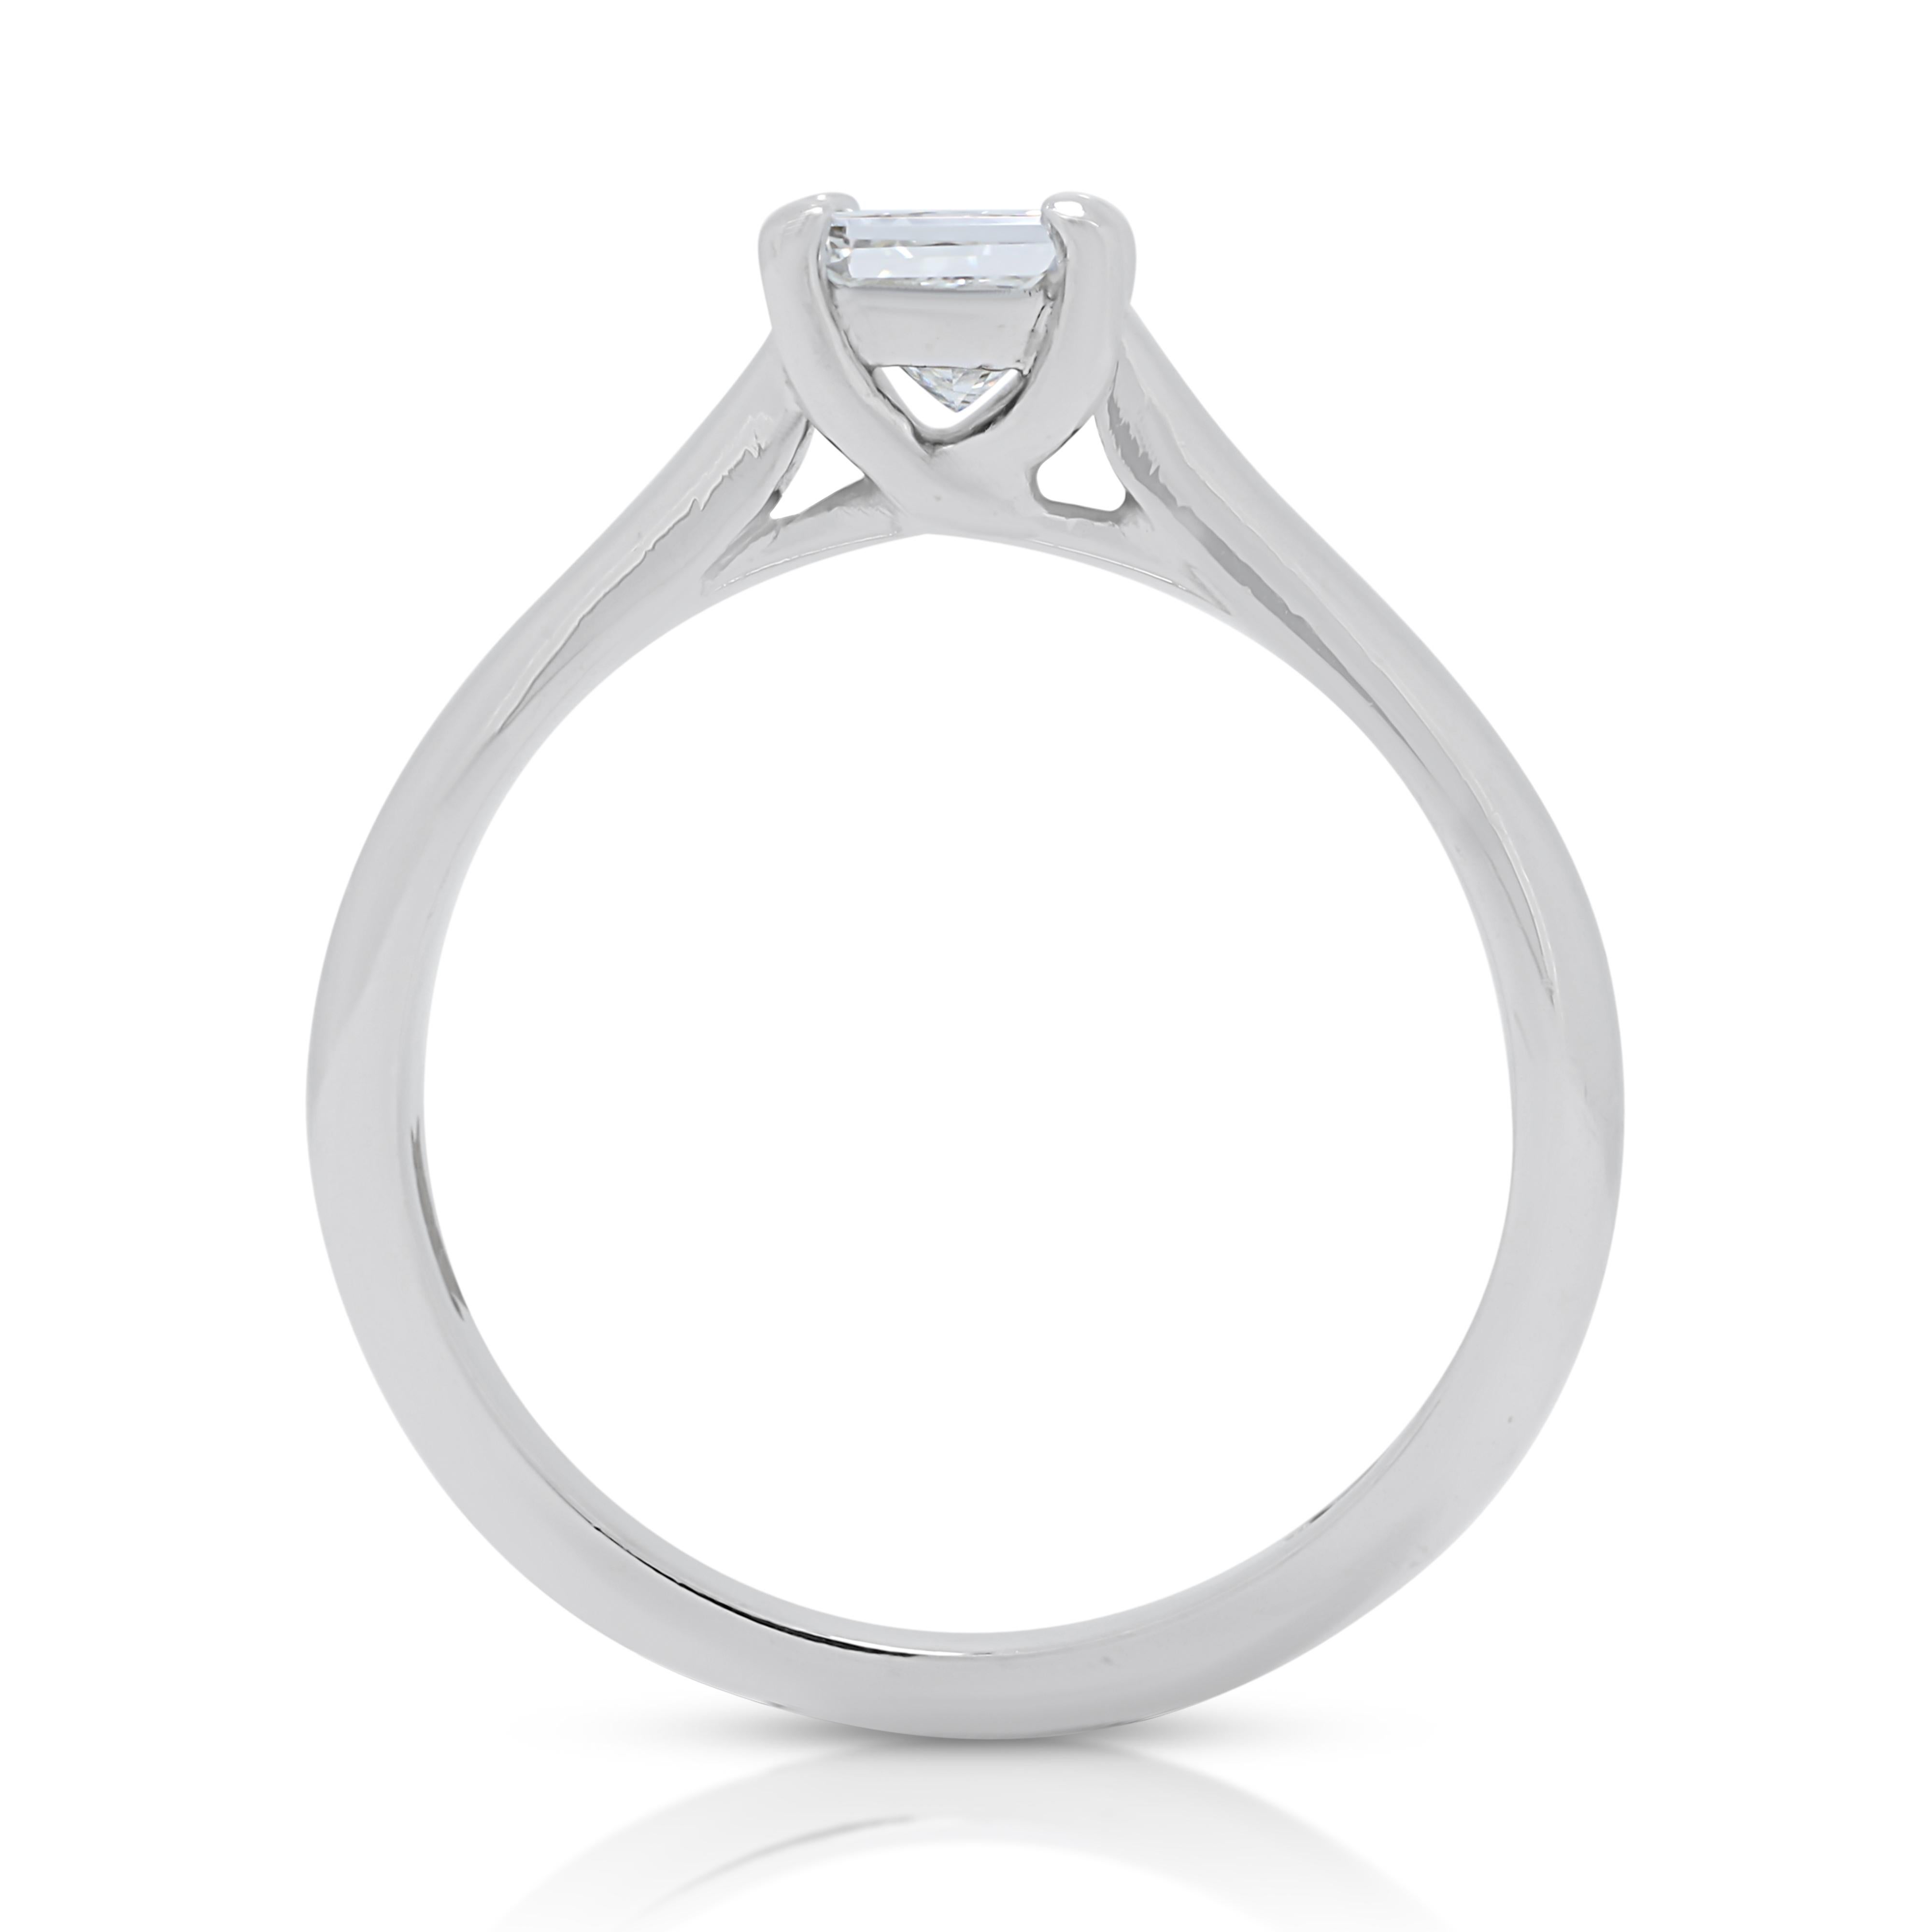 Elegant 0.40ct Diamond Solitaire Ring in 14K White Gold For Sale 2